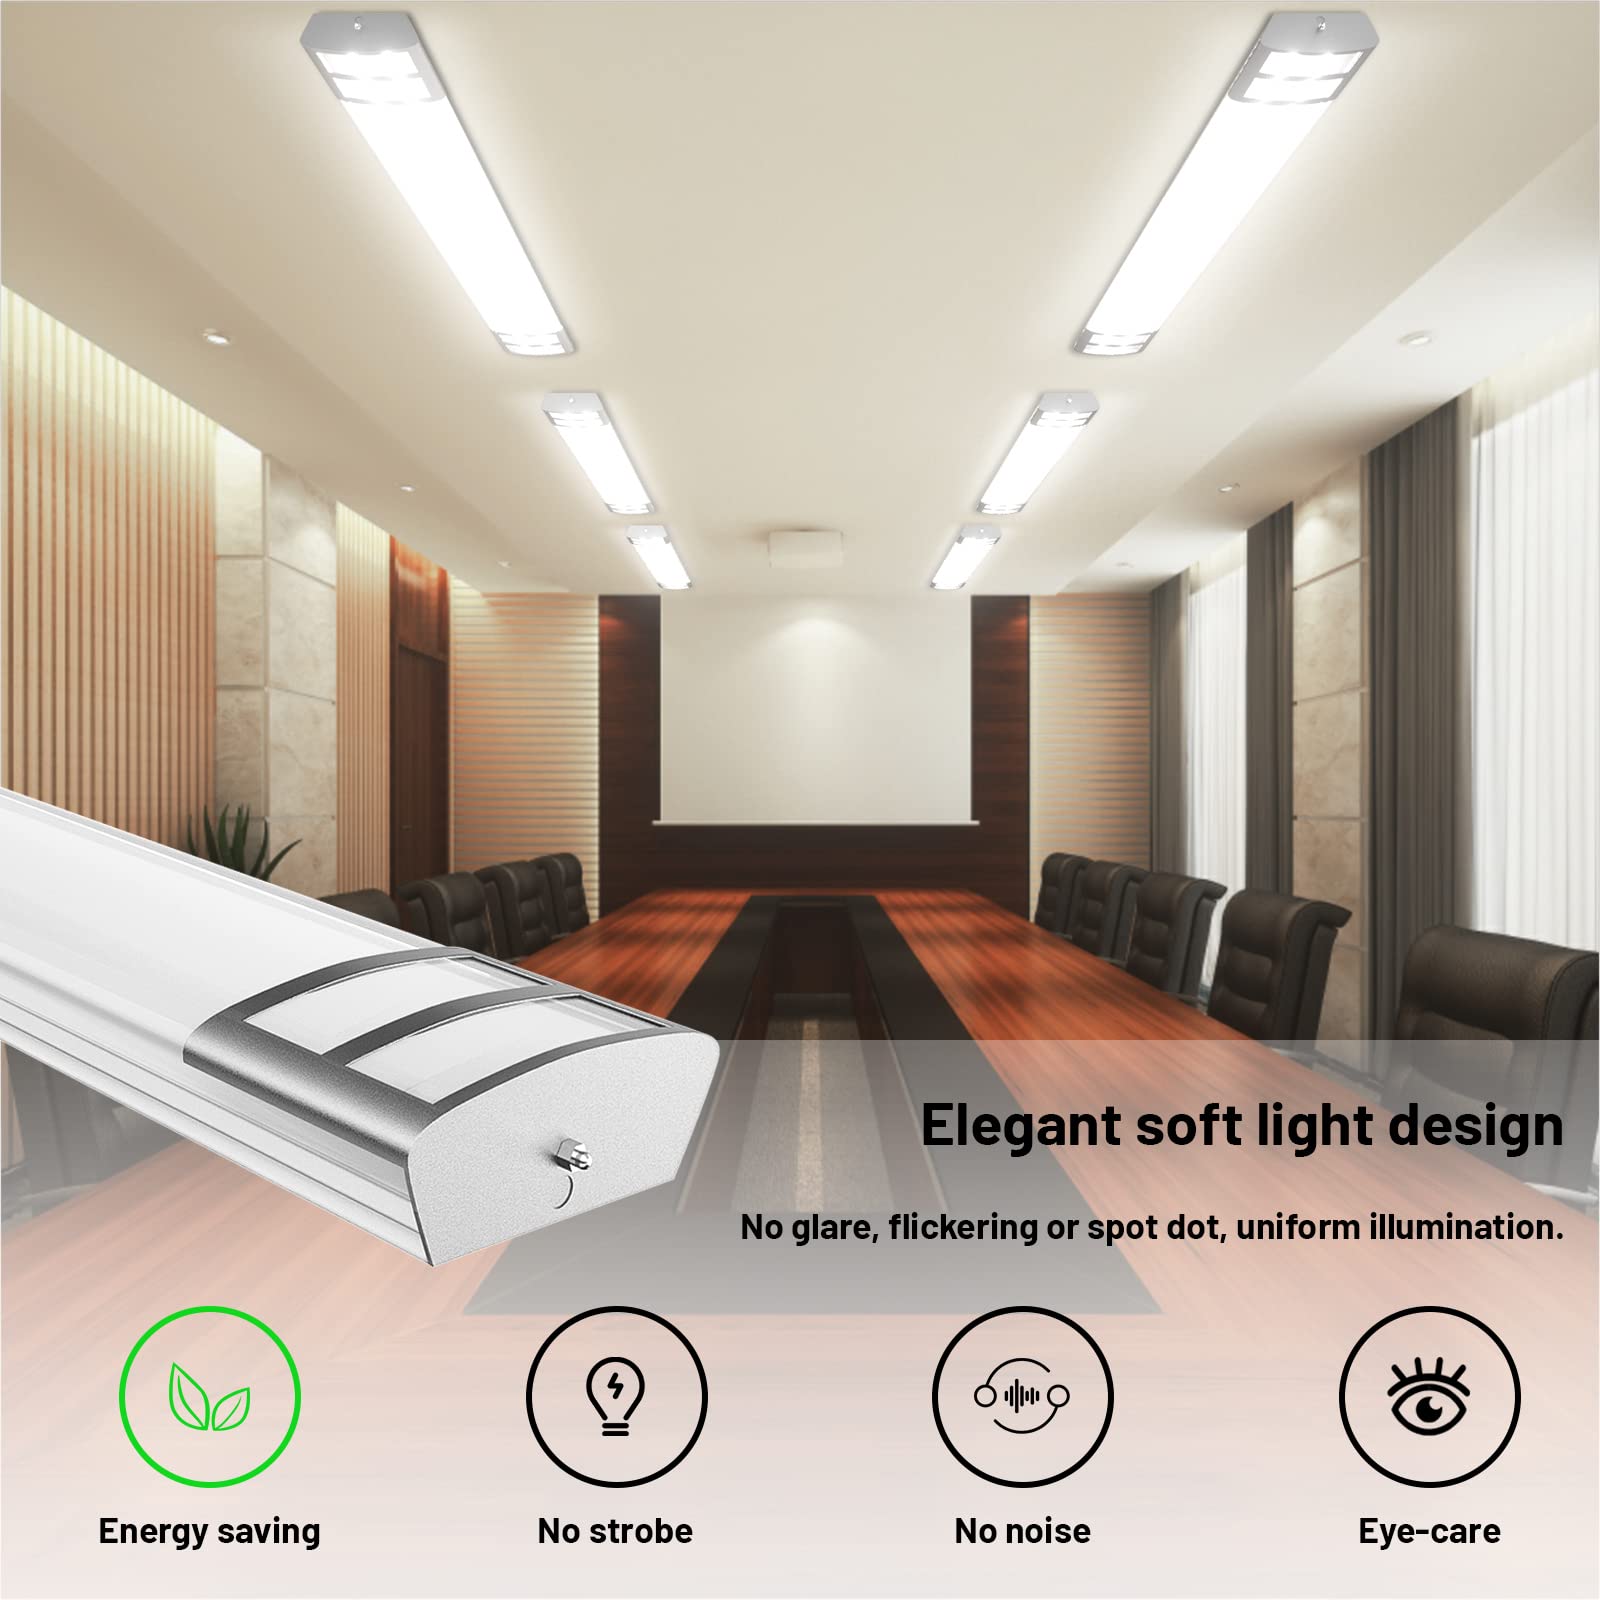 ANTLUX 4FT LED Flush Mount Puff Lights, 40W 4500LM, 4000K Neutral White, 48 Inch Linear LED Kitchen Ceiling Lighting Fixtures for Laundry, Craft Room, Fluorescent Light Replacement